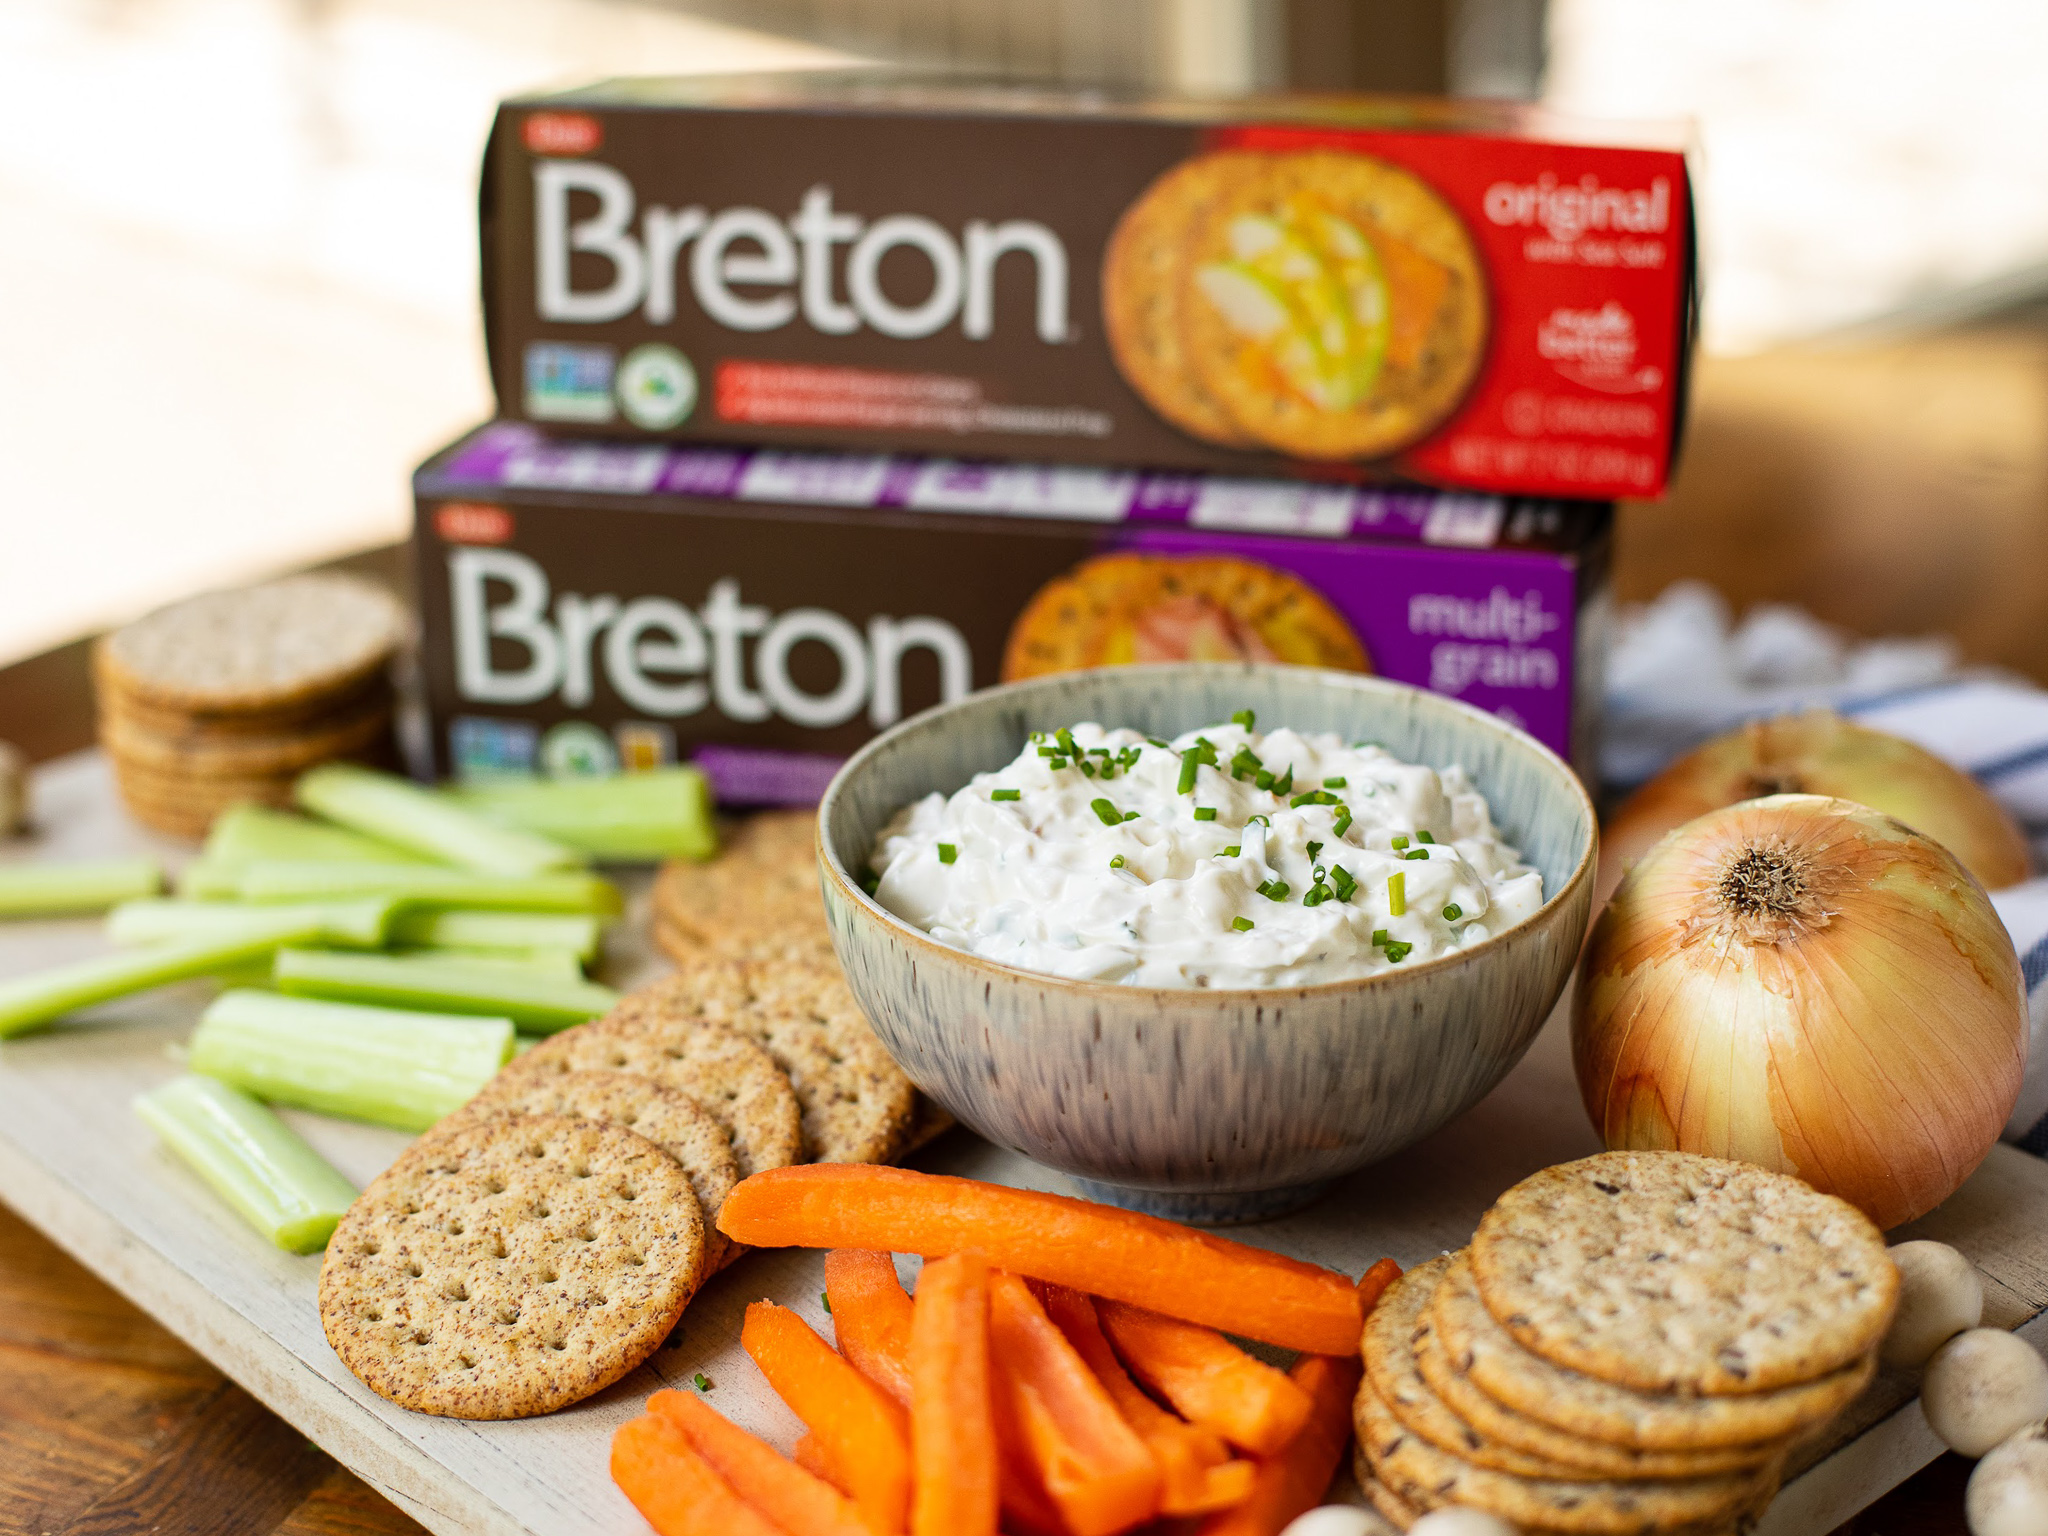 Start The Summer Grilling Season With Breton® Crackers And My Grilled Vidalia Onion Dip Recipe